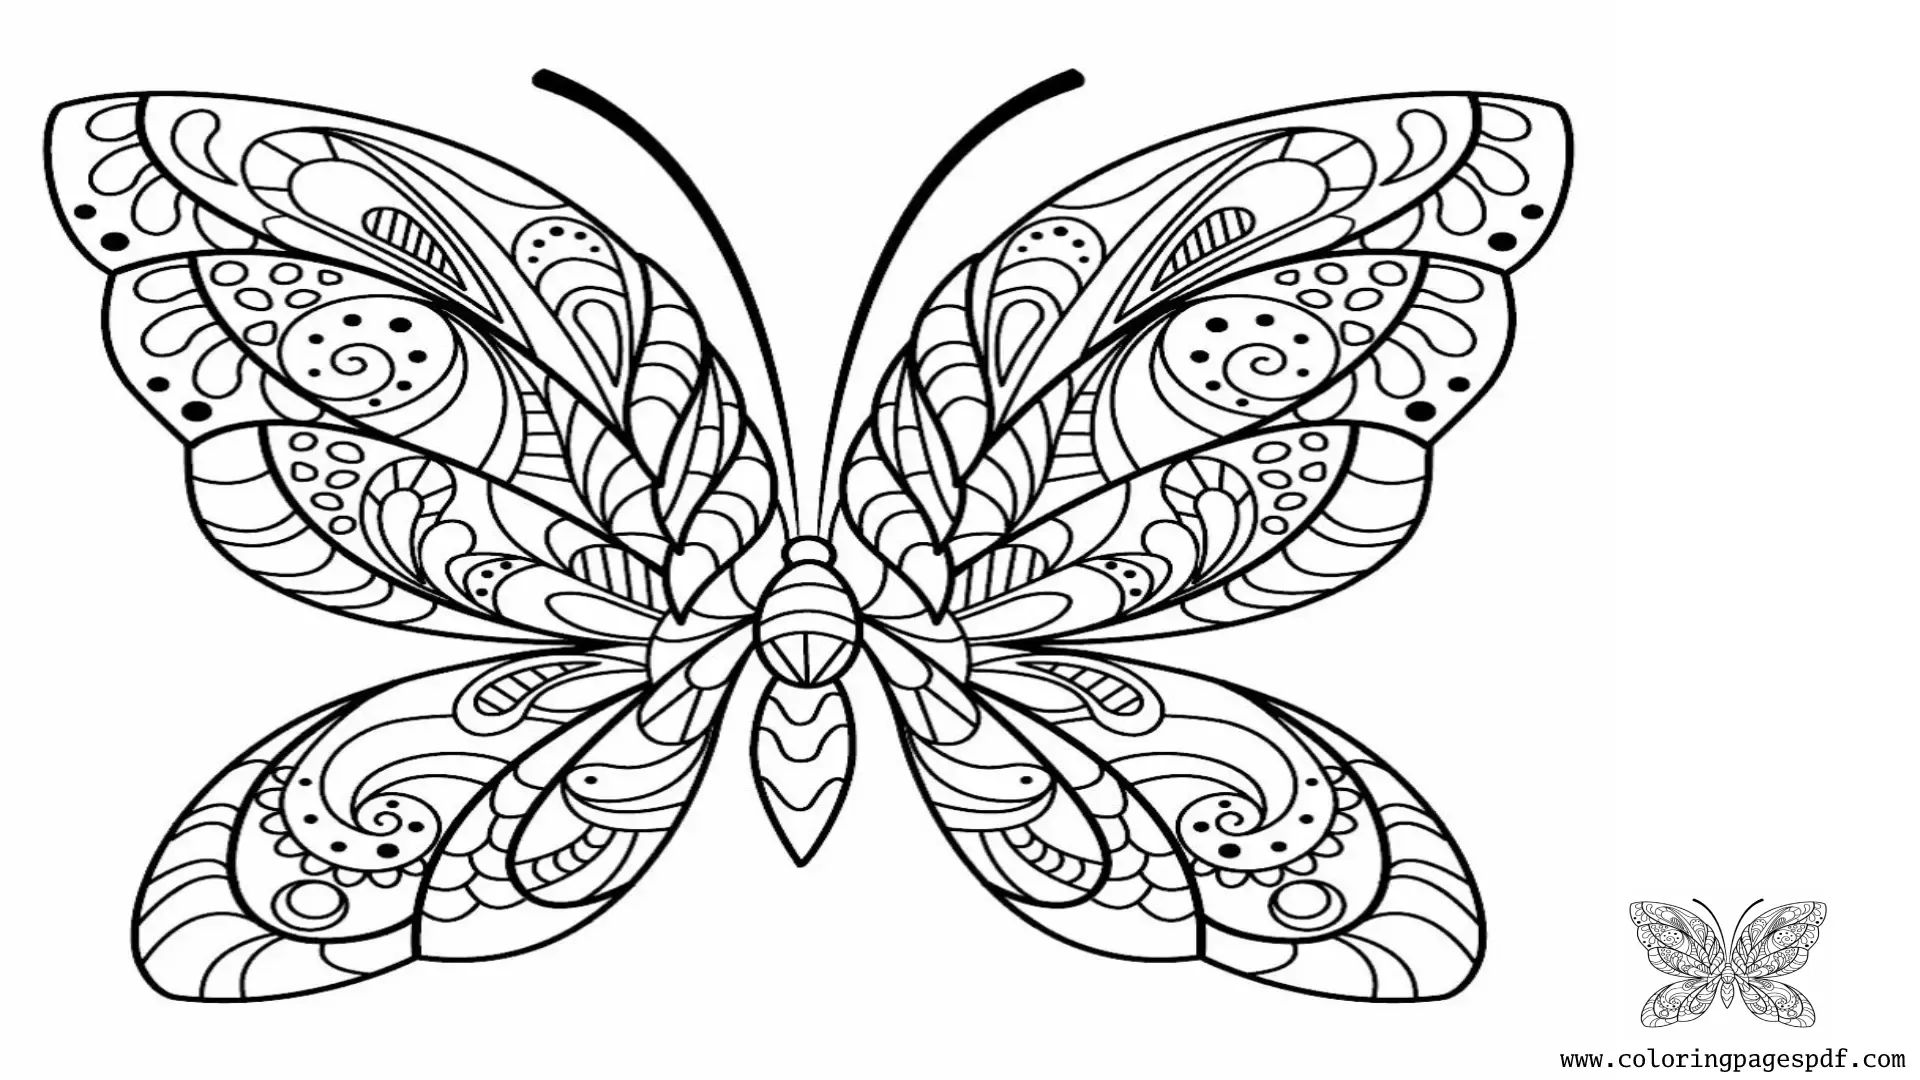 Coloring Page Of A Butterfly With Huge Wings